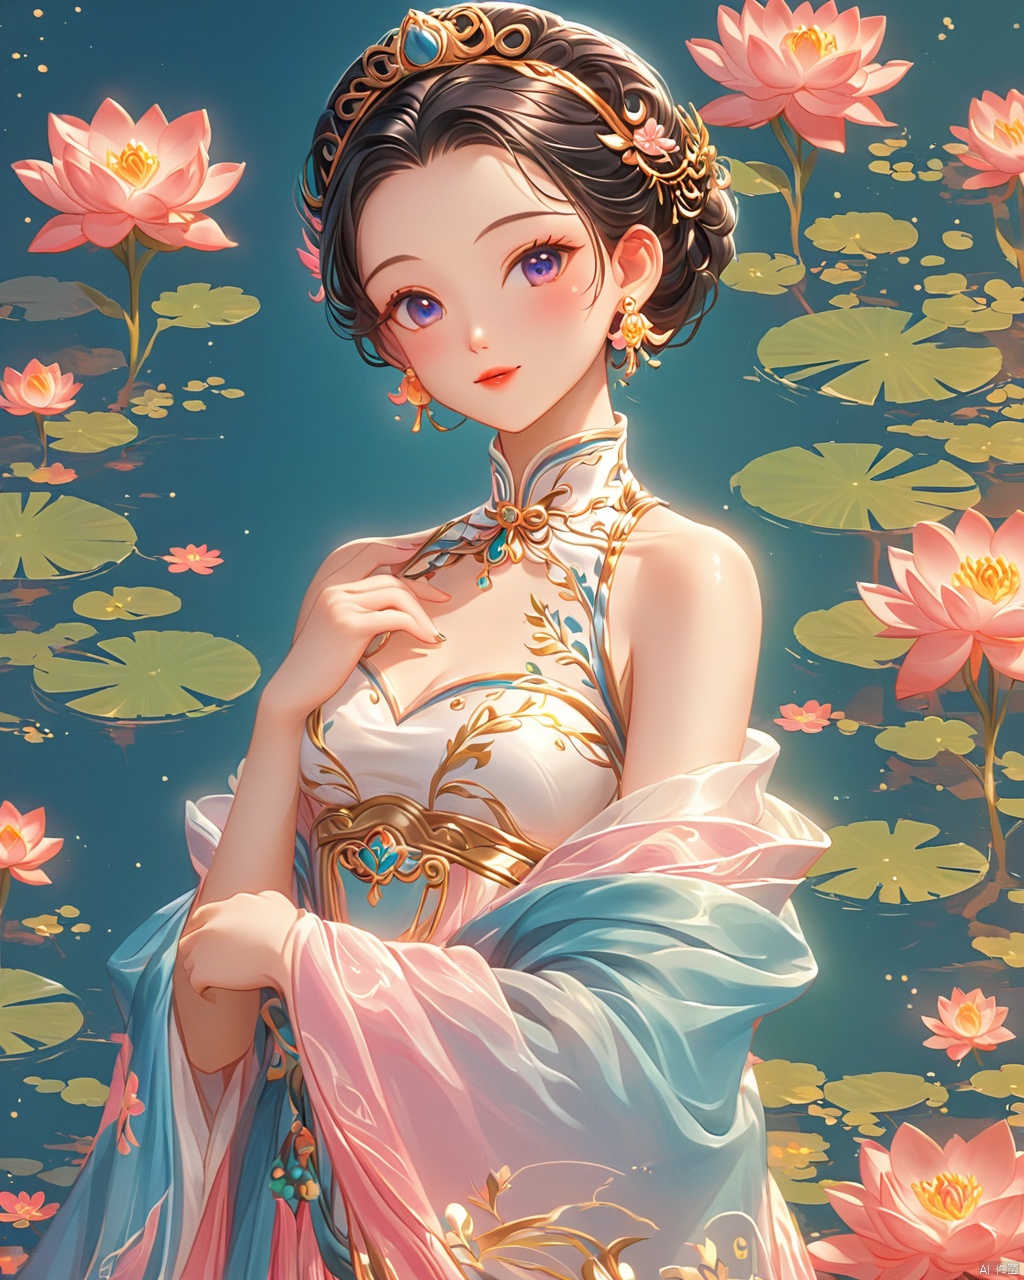  A beautiful woman with a simple lotus flower,Illustration,Minimalismm,dreamlike picture,subtle gradation,calm harmony,elegant use of negative space,graphic design inspired illustrations, Oriental flat aesthetics